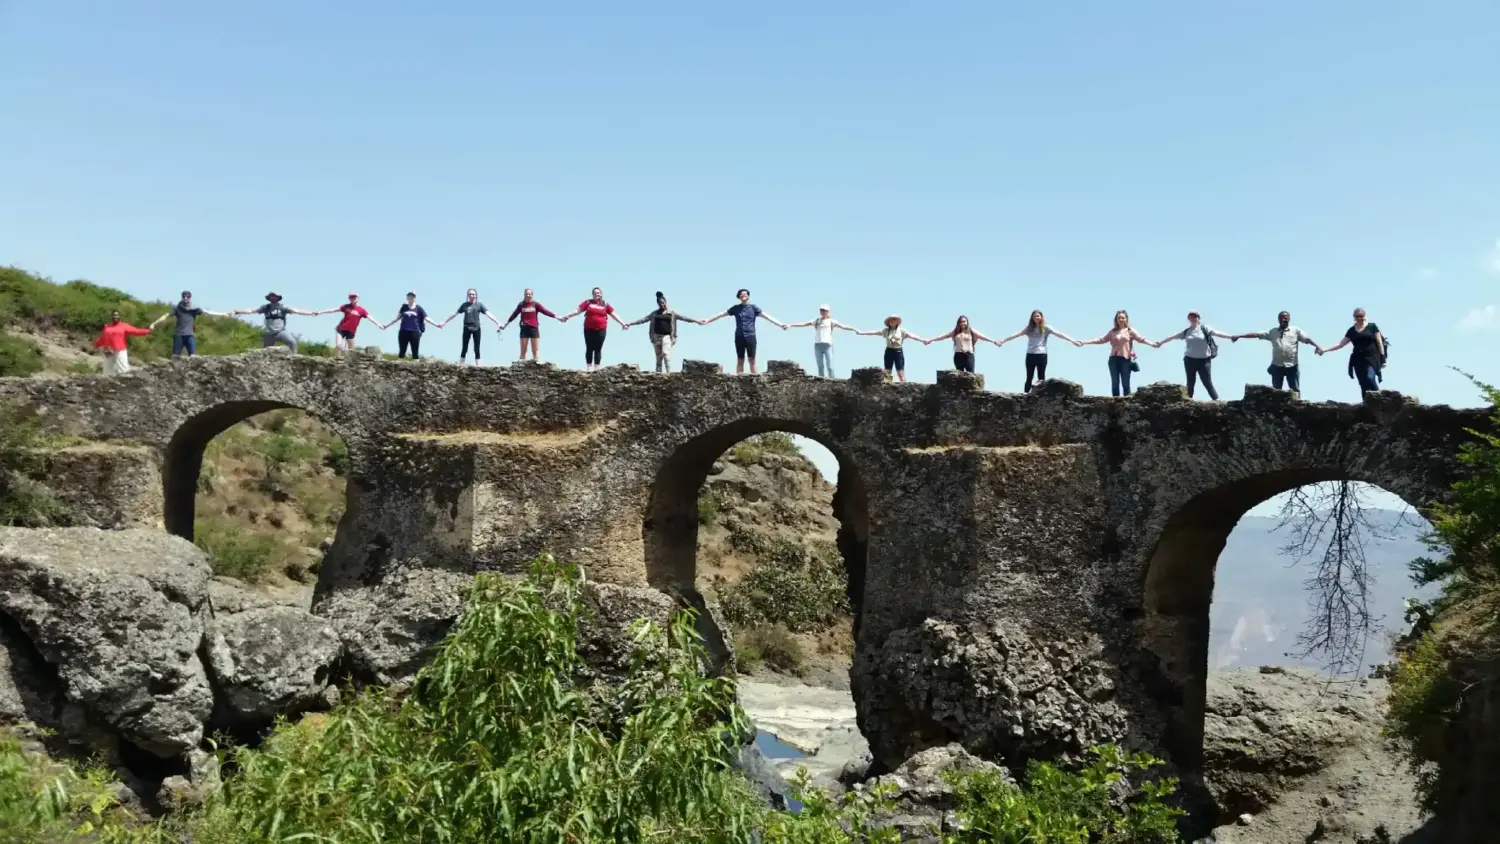 Students stand arm to arm on a stone bridge in Ethiopia.